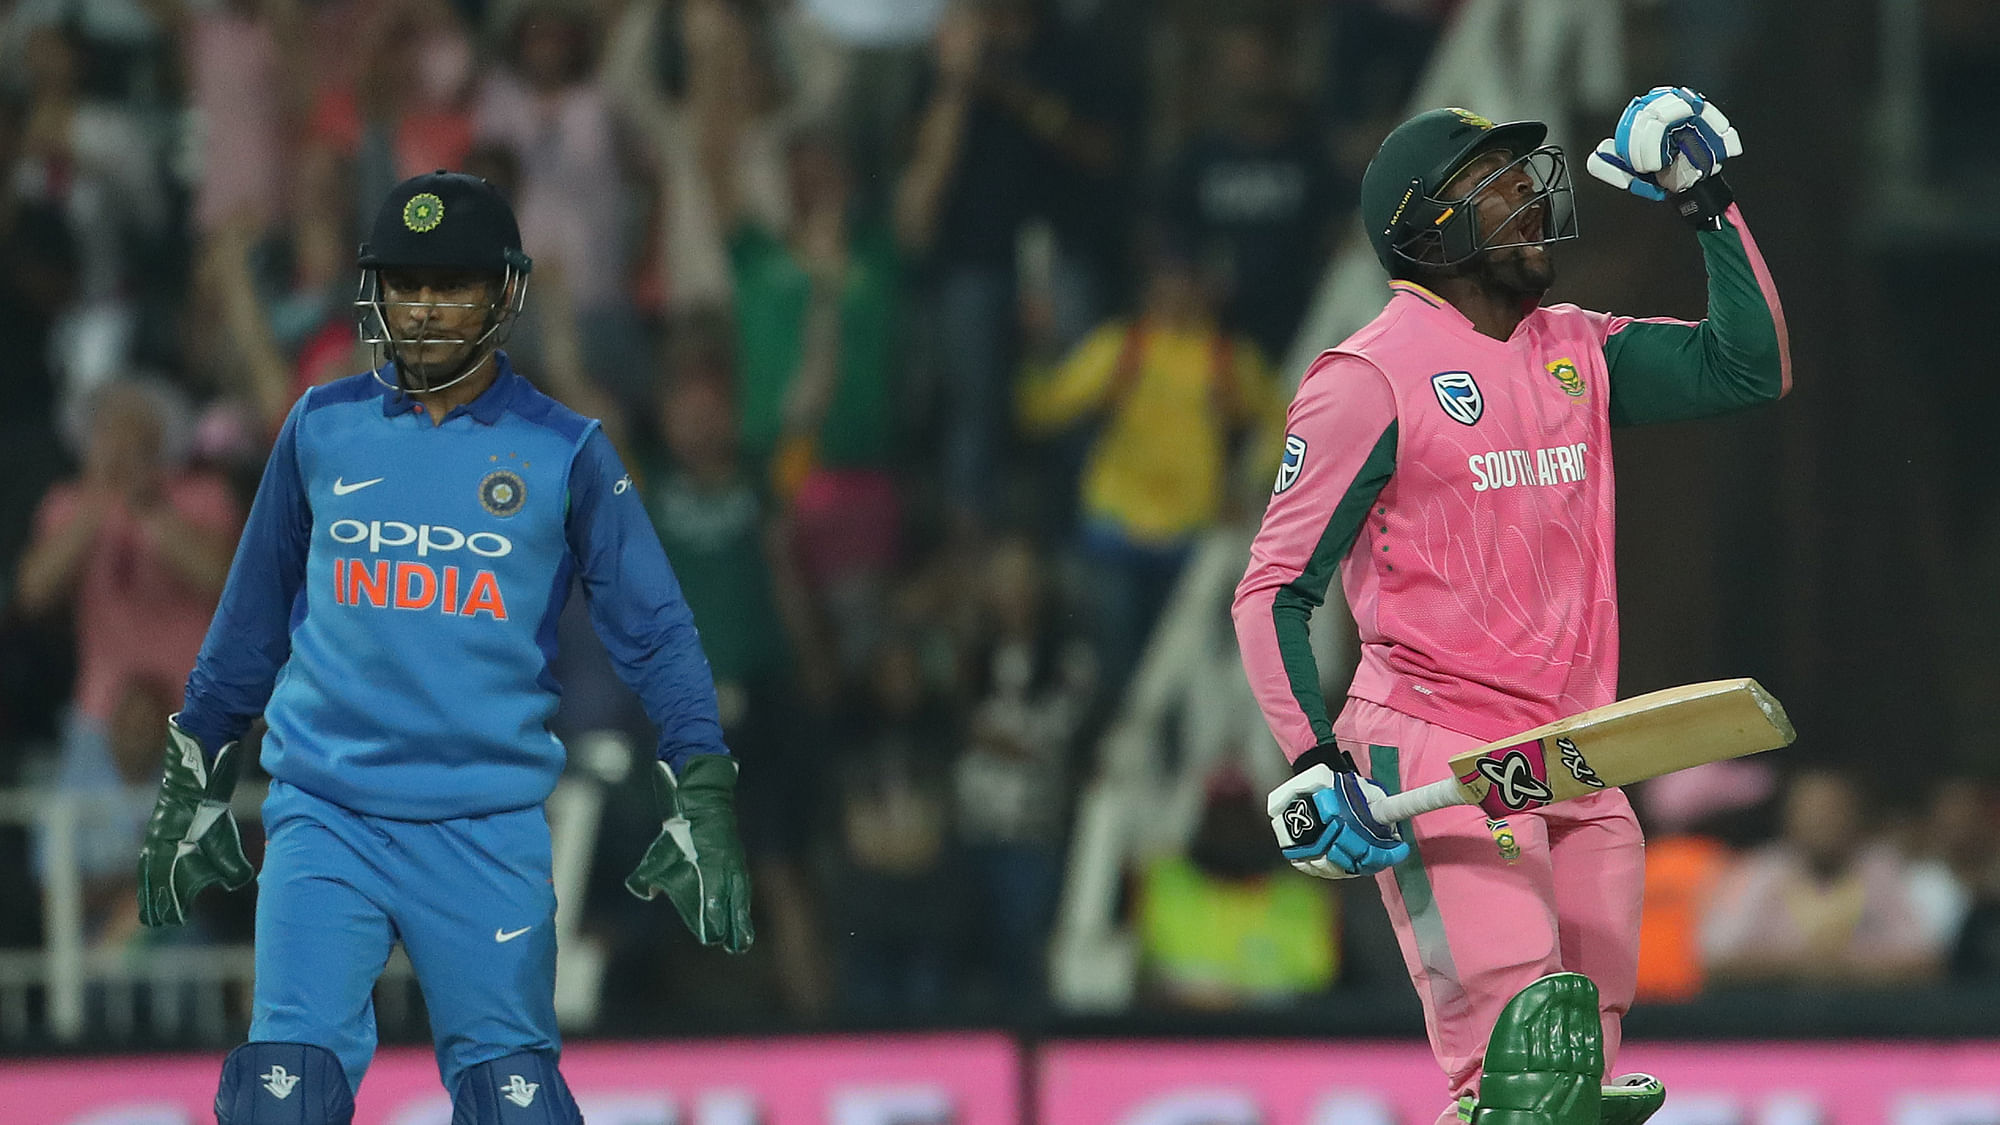 India lost to South Africa in the fourth ODI on 10 February.